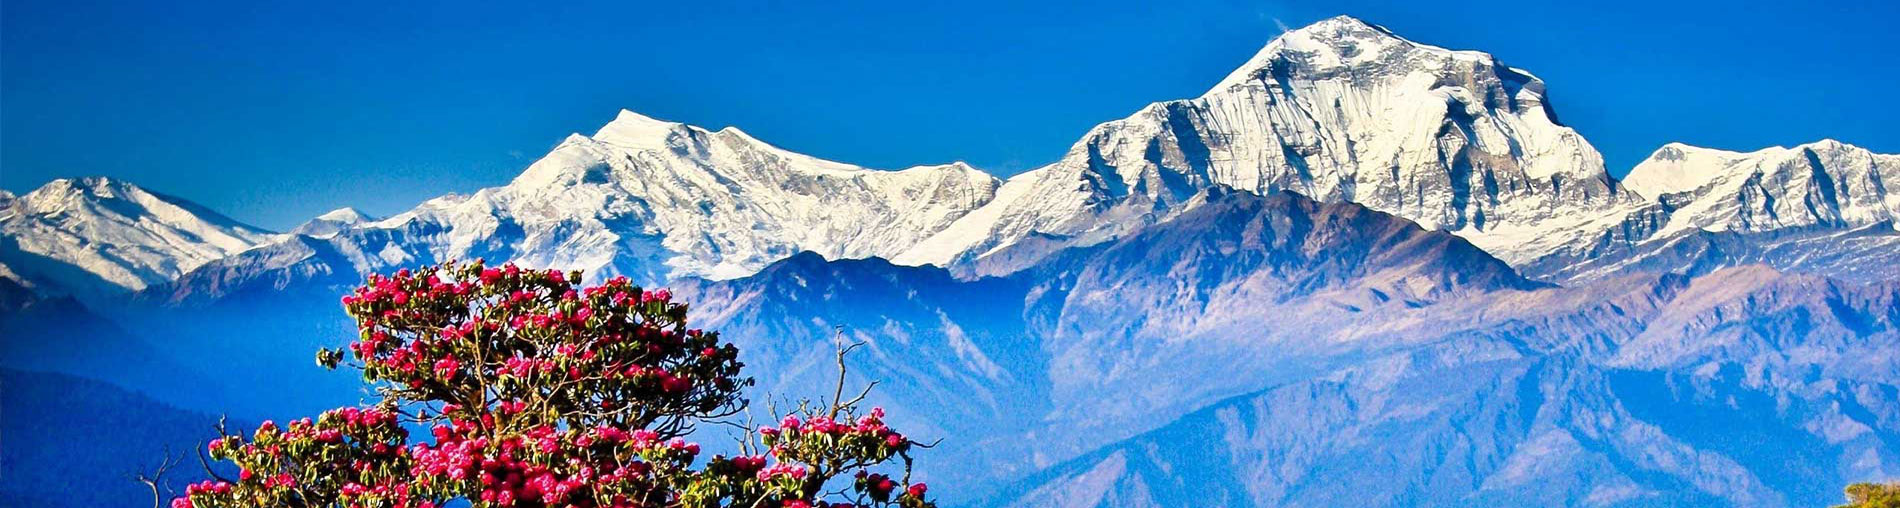 Nepal Holiday Package - 3 Nights